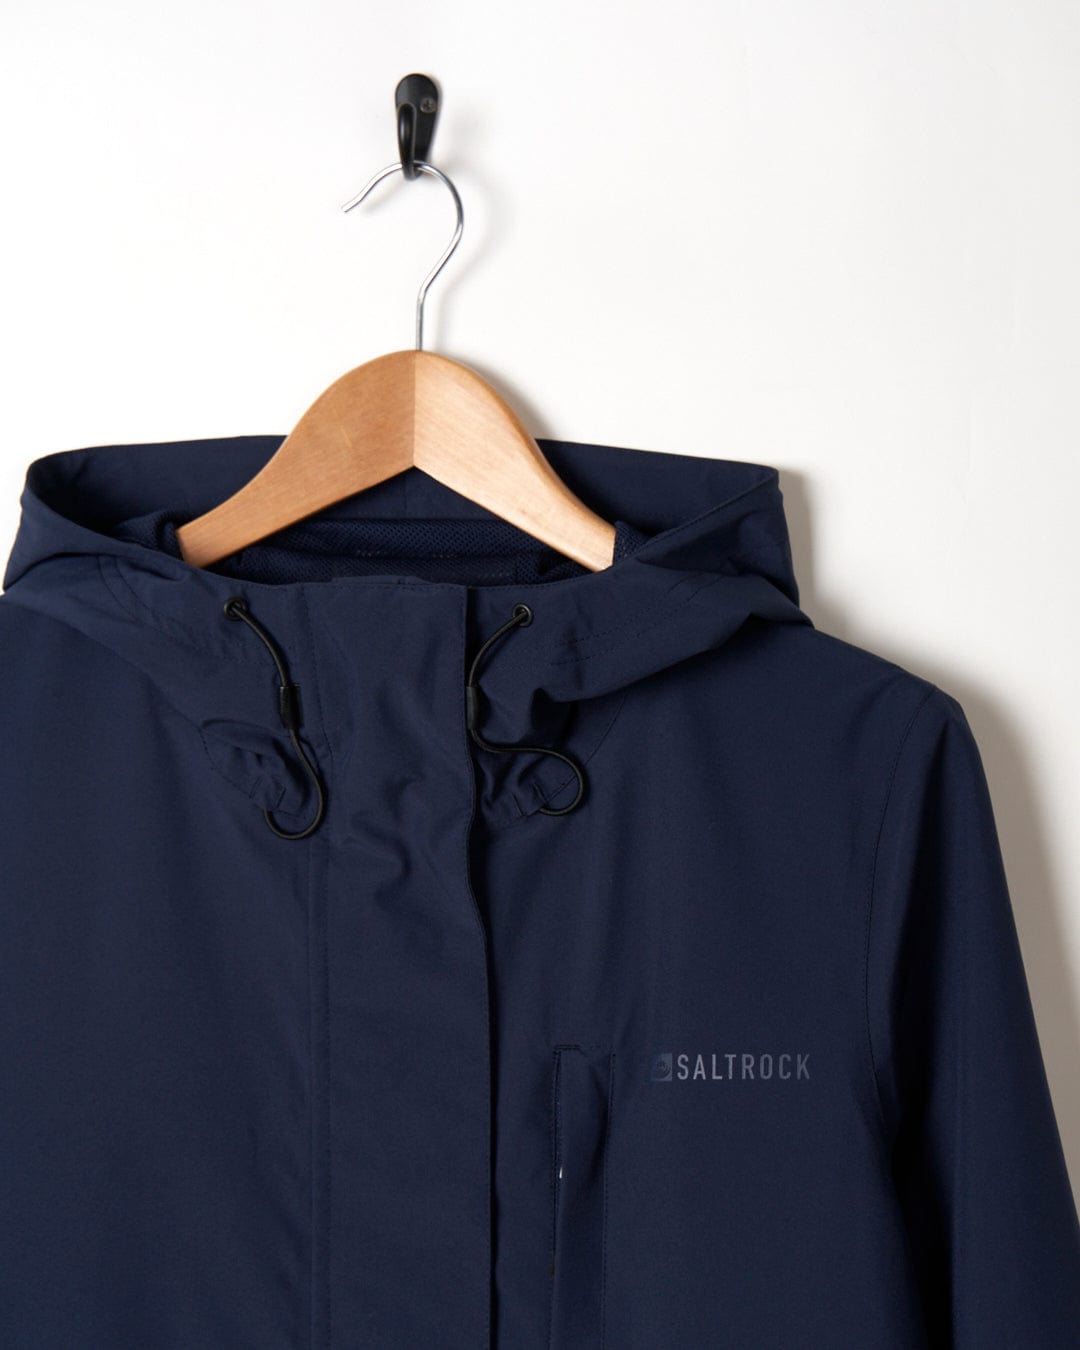 A North West - Womens Waterproof Jacket - Blue with a hood on a wooden hanger against a white background, with the brand name 'saltrock' visible on the front.